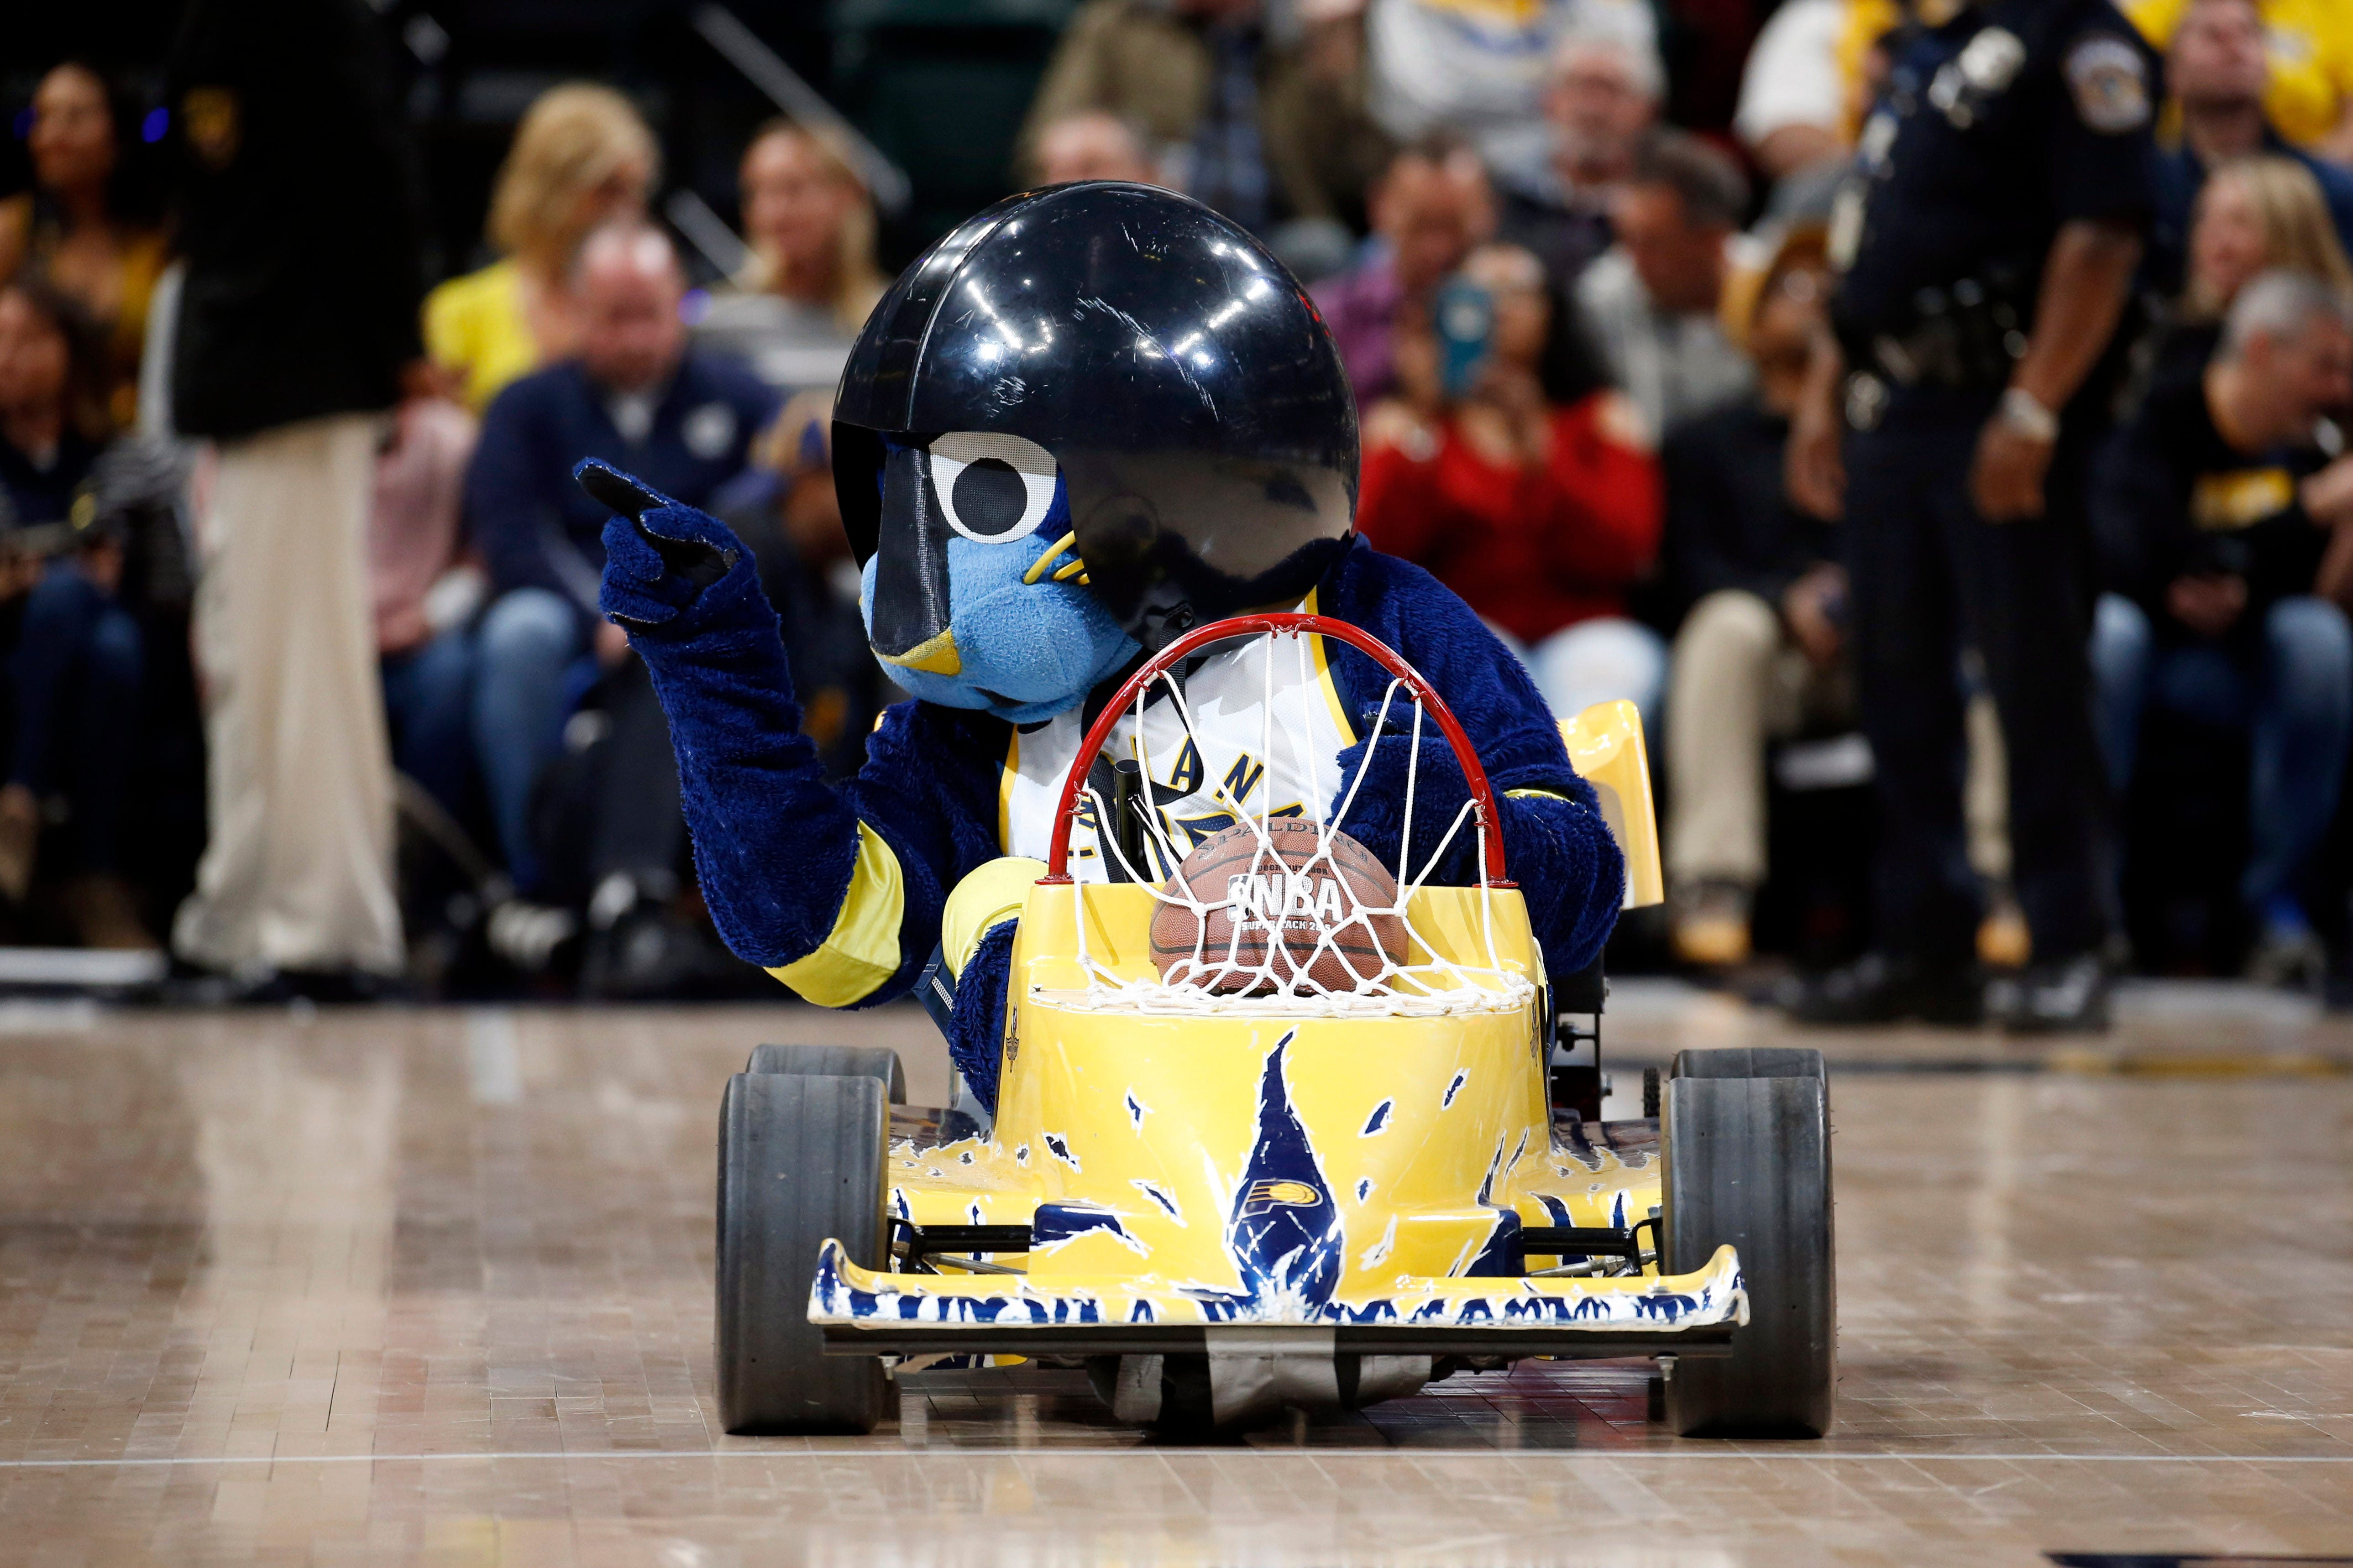 Indiana Pacers mascot Boomer drives an Indy Car go kart during a time out against the Los Angeles Lakers during the third quarter at Bankers Life Fieldhouse in Indianapolis.